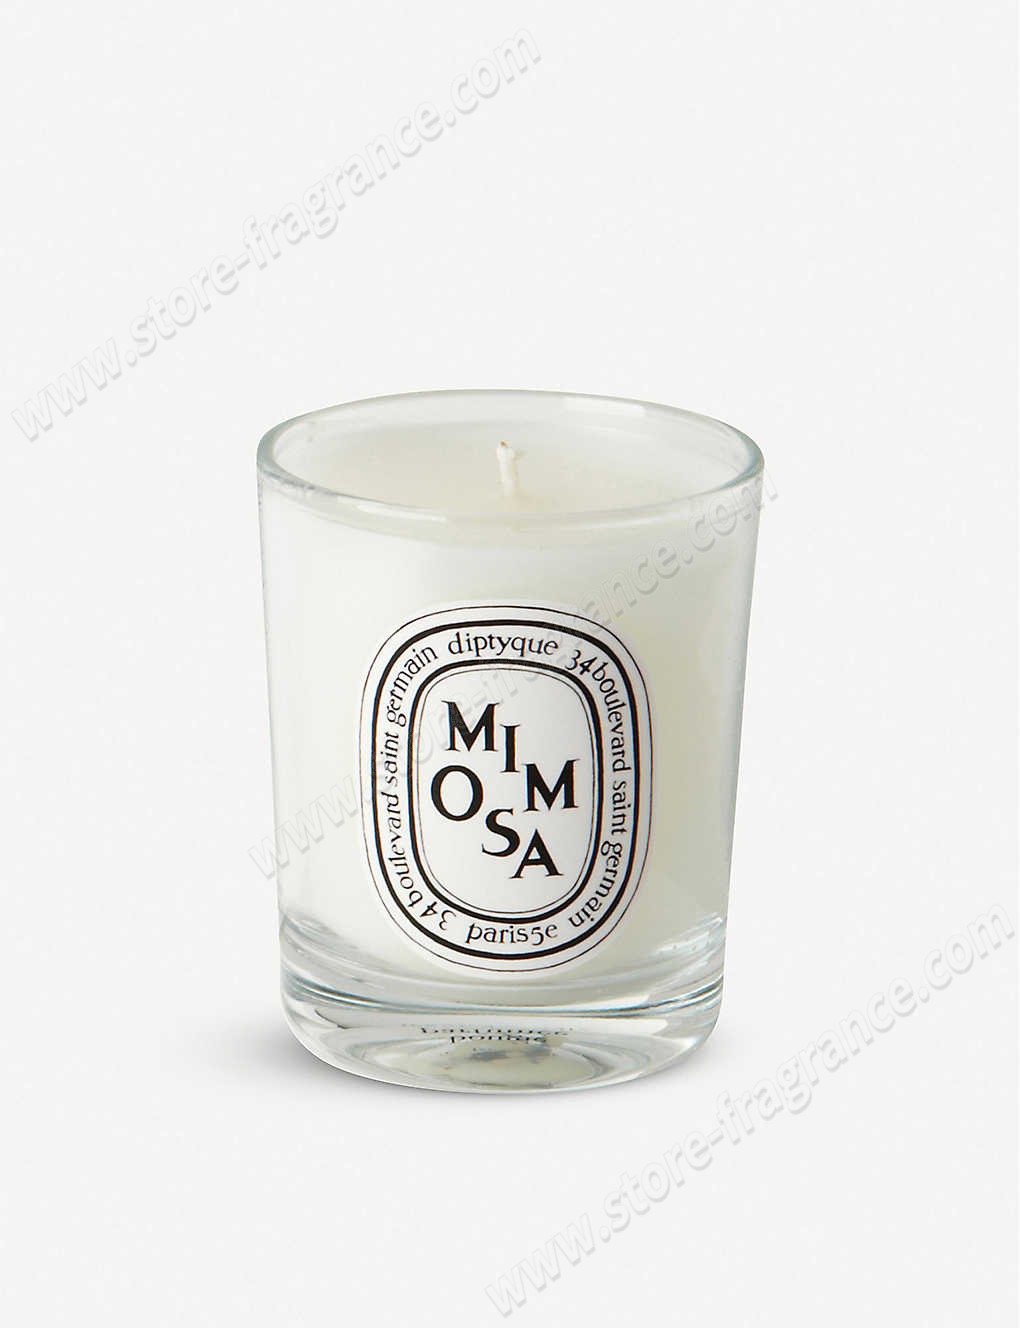 DIPTYQUE/Mimosa mini scented candle ✿ Discount Store - DIPTYQUE/Mimosa mini scented candle ✿ Discount Store